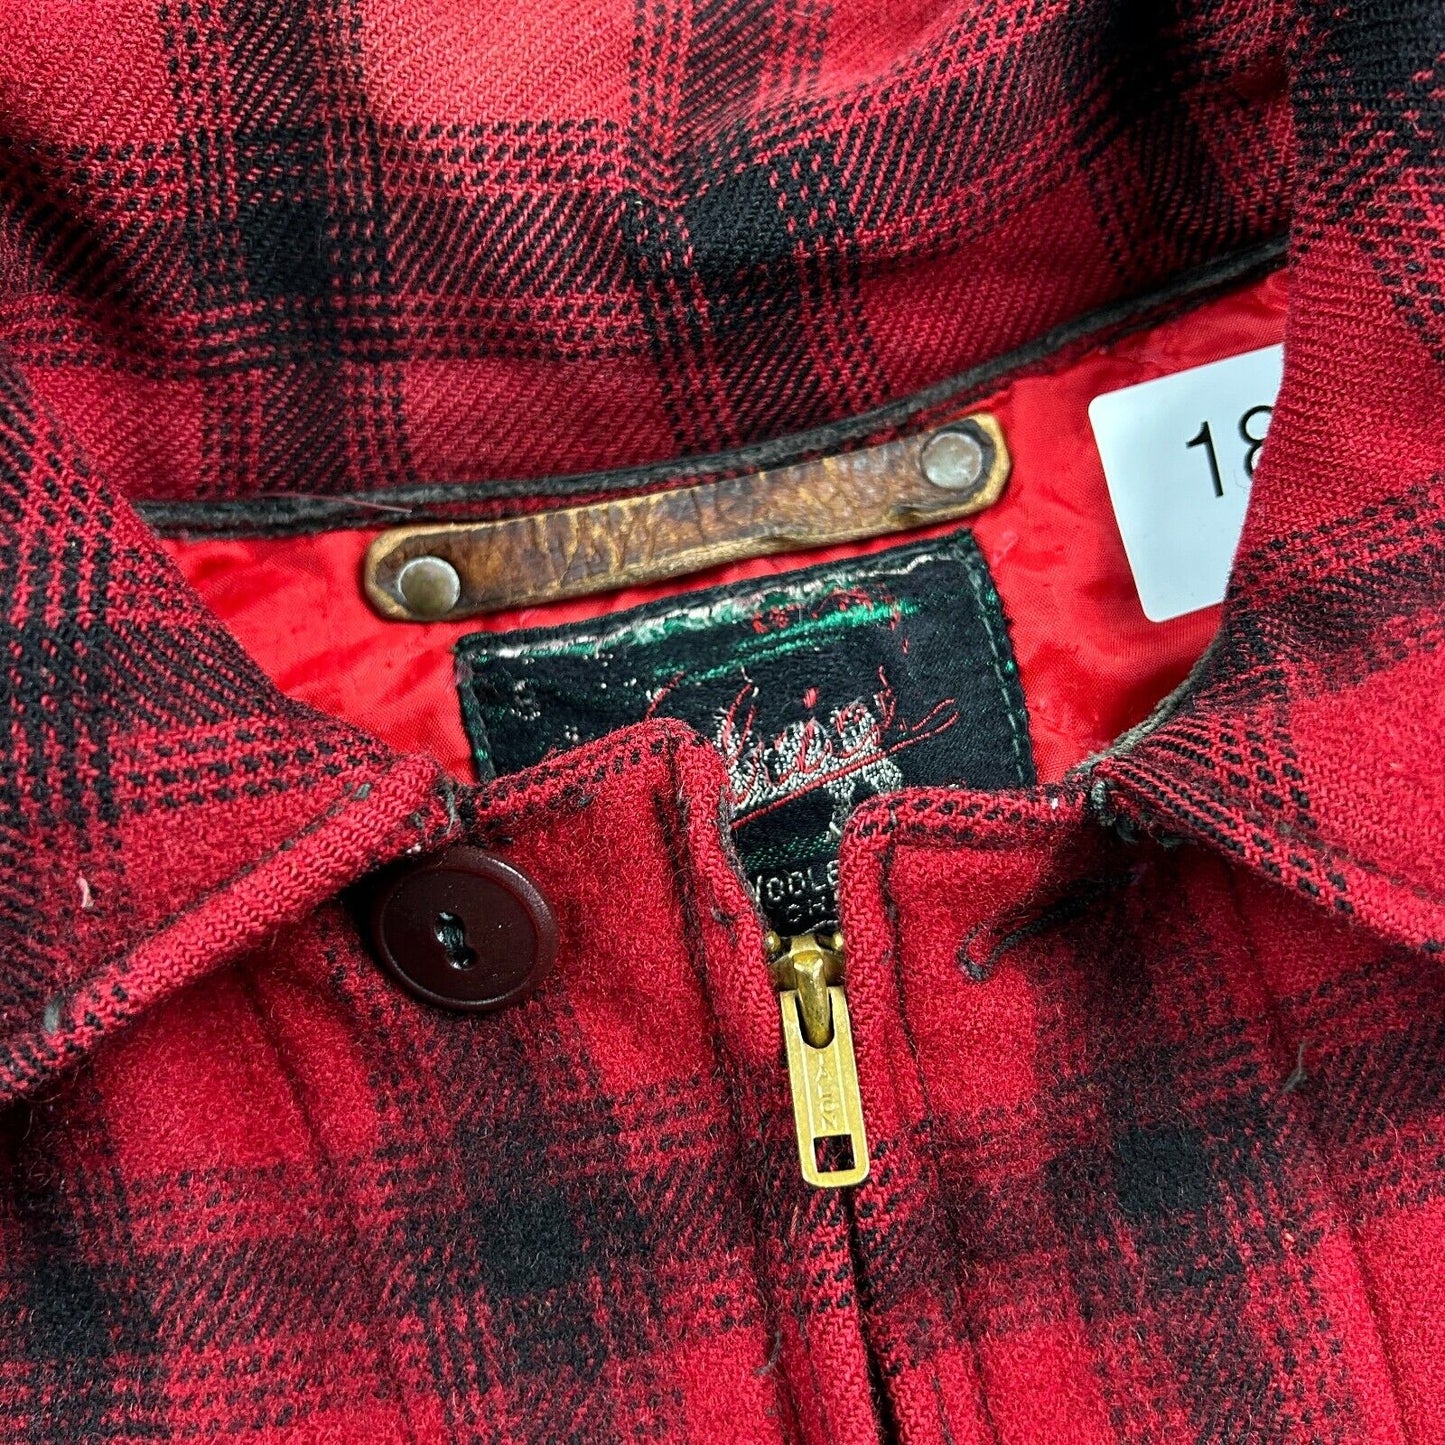 VINTAGE 80s | Woolrich Wool Plaid Flannel Lined Jacket sz S Adult